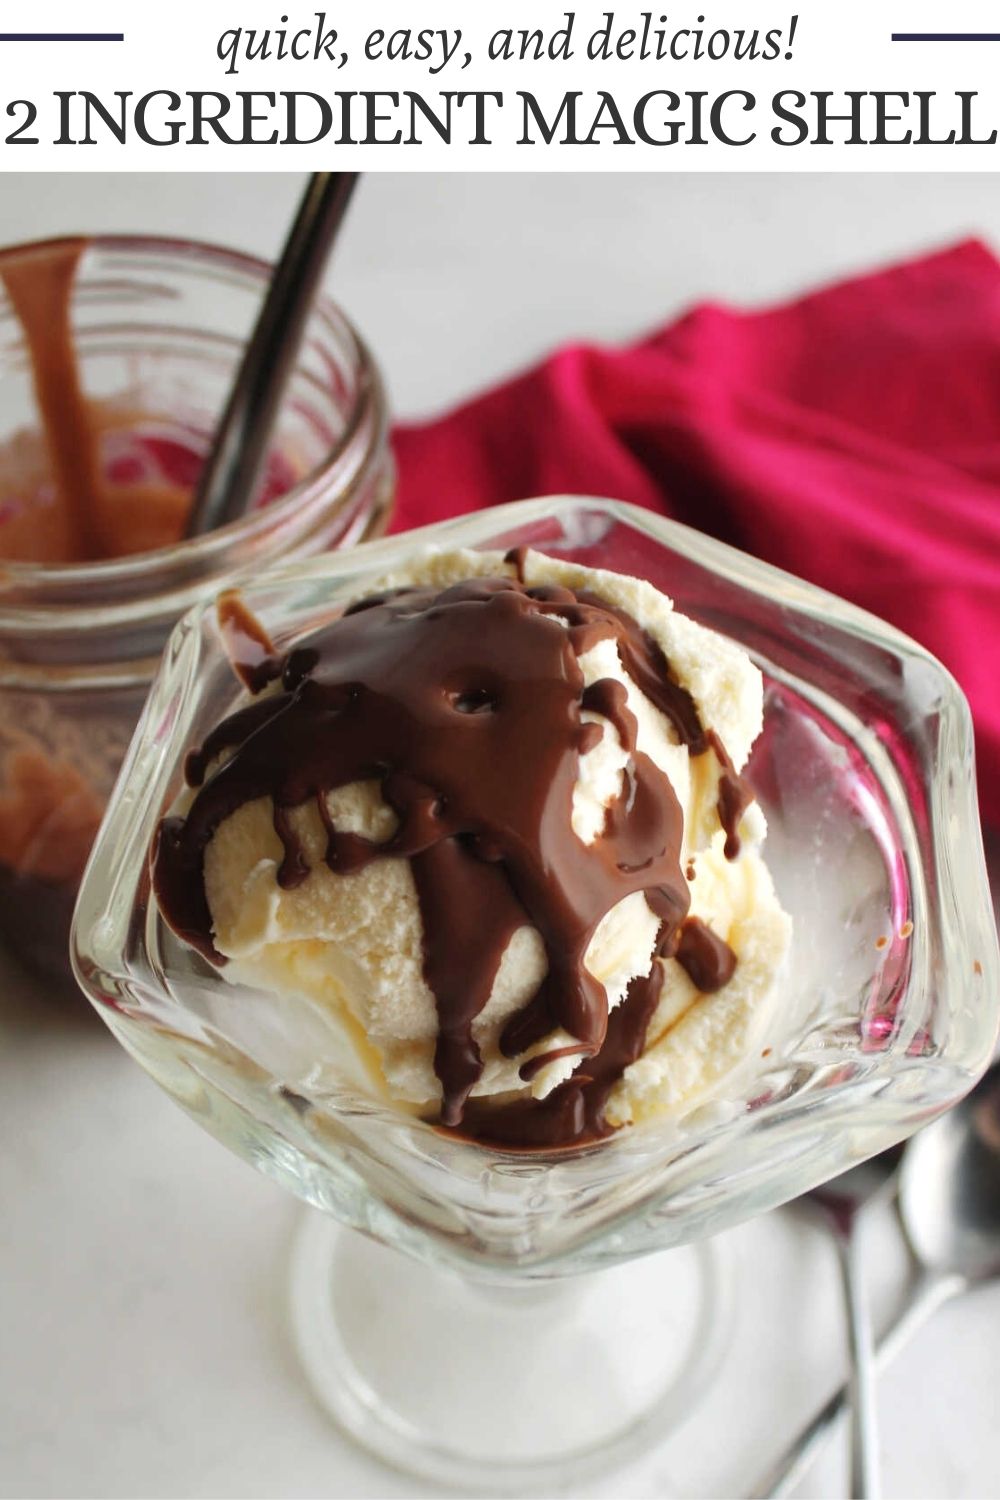 Take your ice cream to the next level with a drizzle of this 2 ingredient chocolate magic shell. It is the perfect topping for your next sundae!